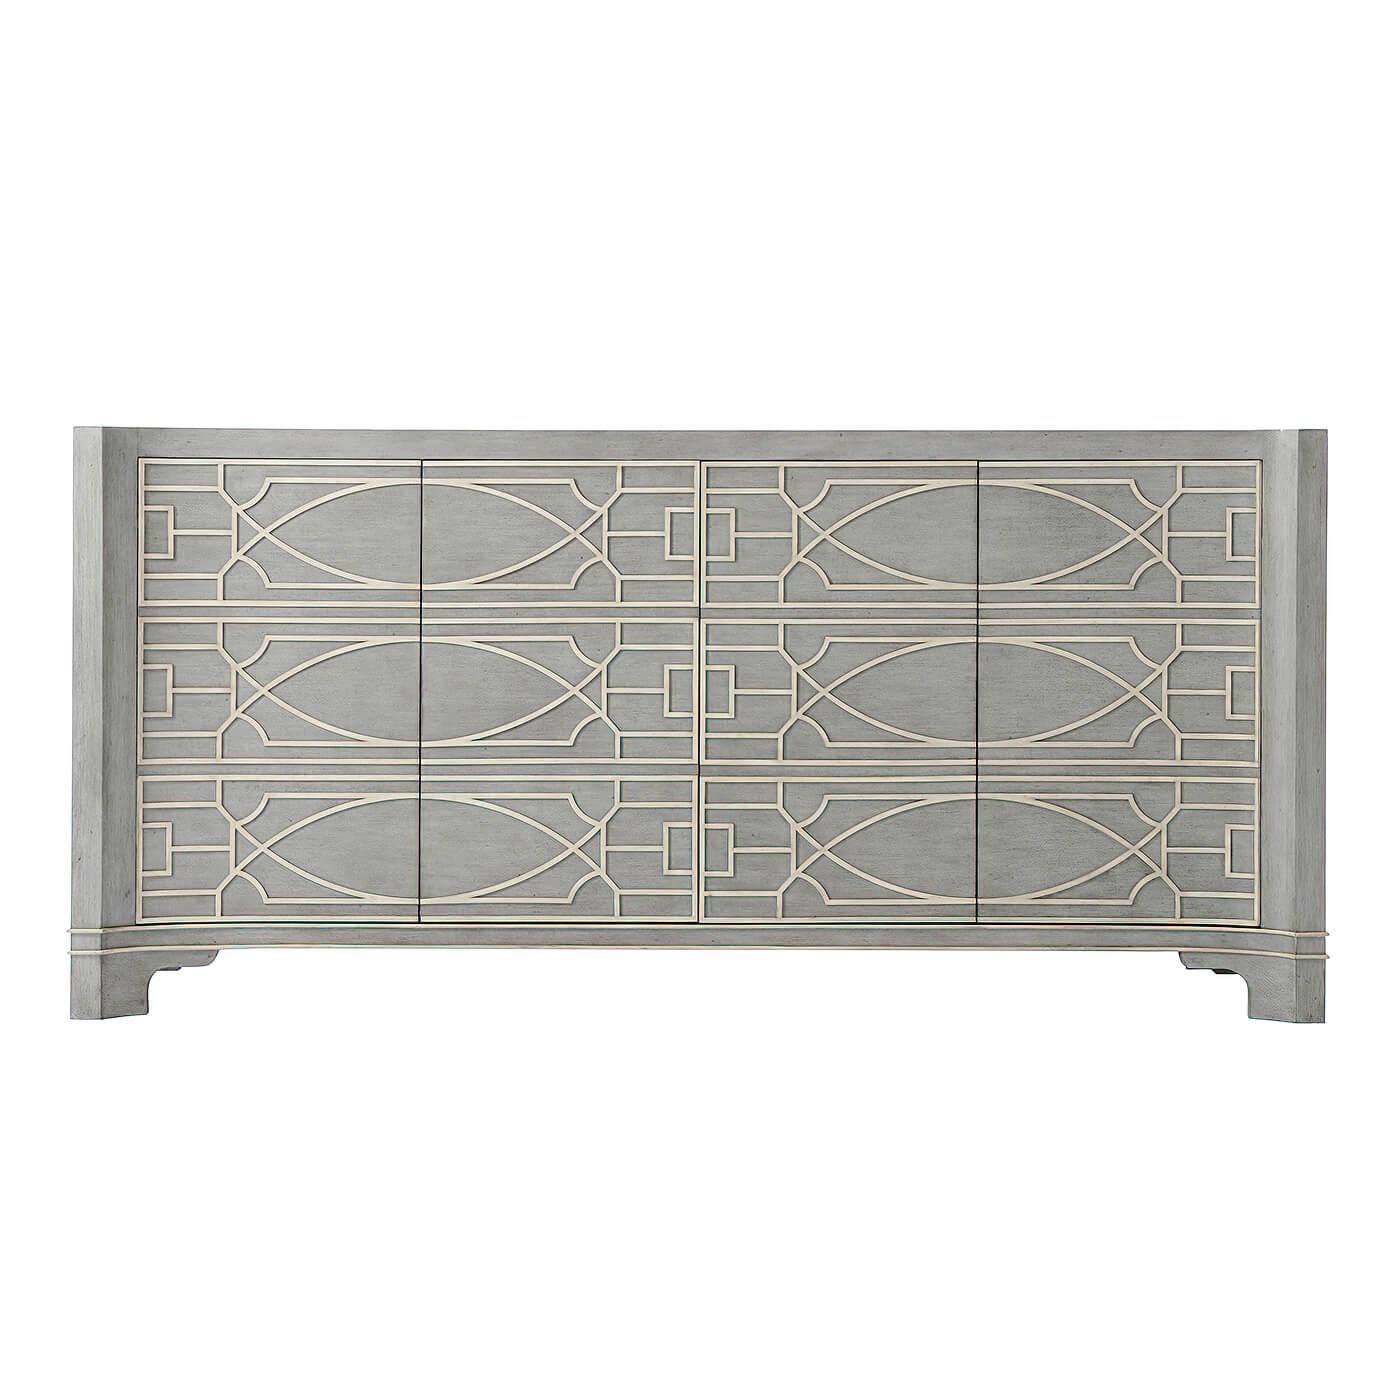 A Chinese Chippendale style long cabinet, with a grey limestone painted finish. A long blind fret design, the antiqued and painted cabinet with four doors and adjustable shelves.

Dimensions: 76.25